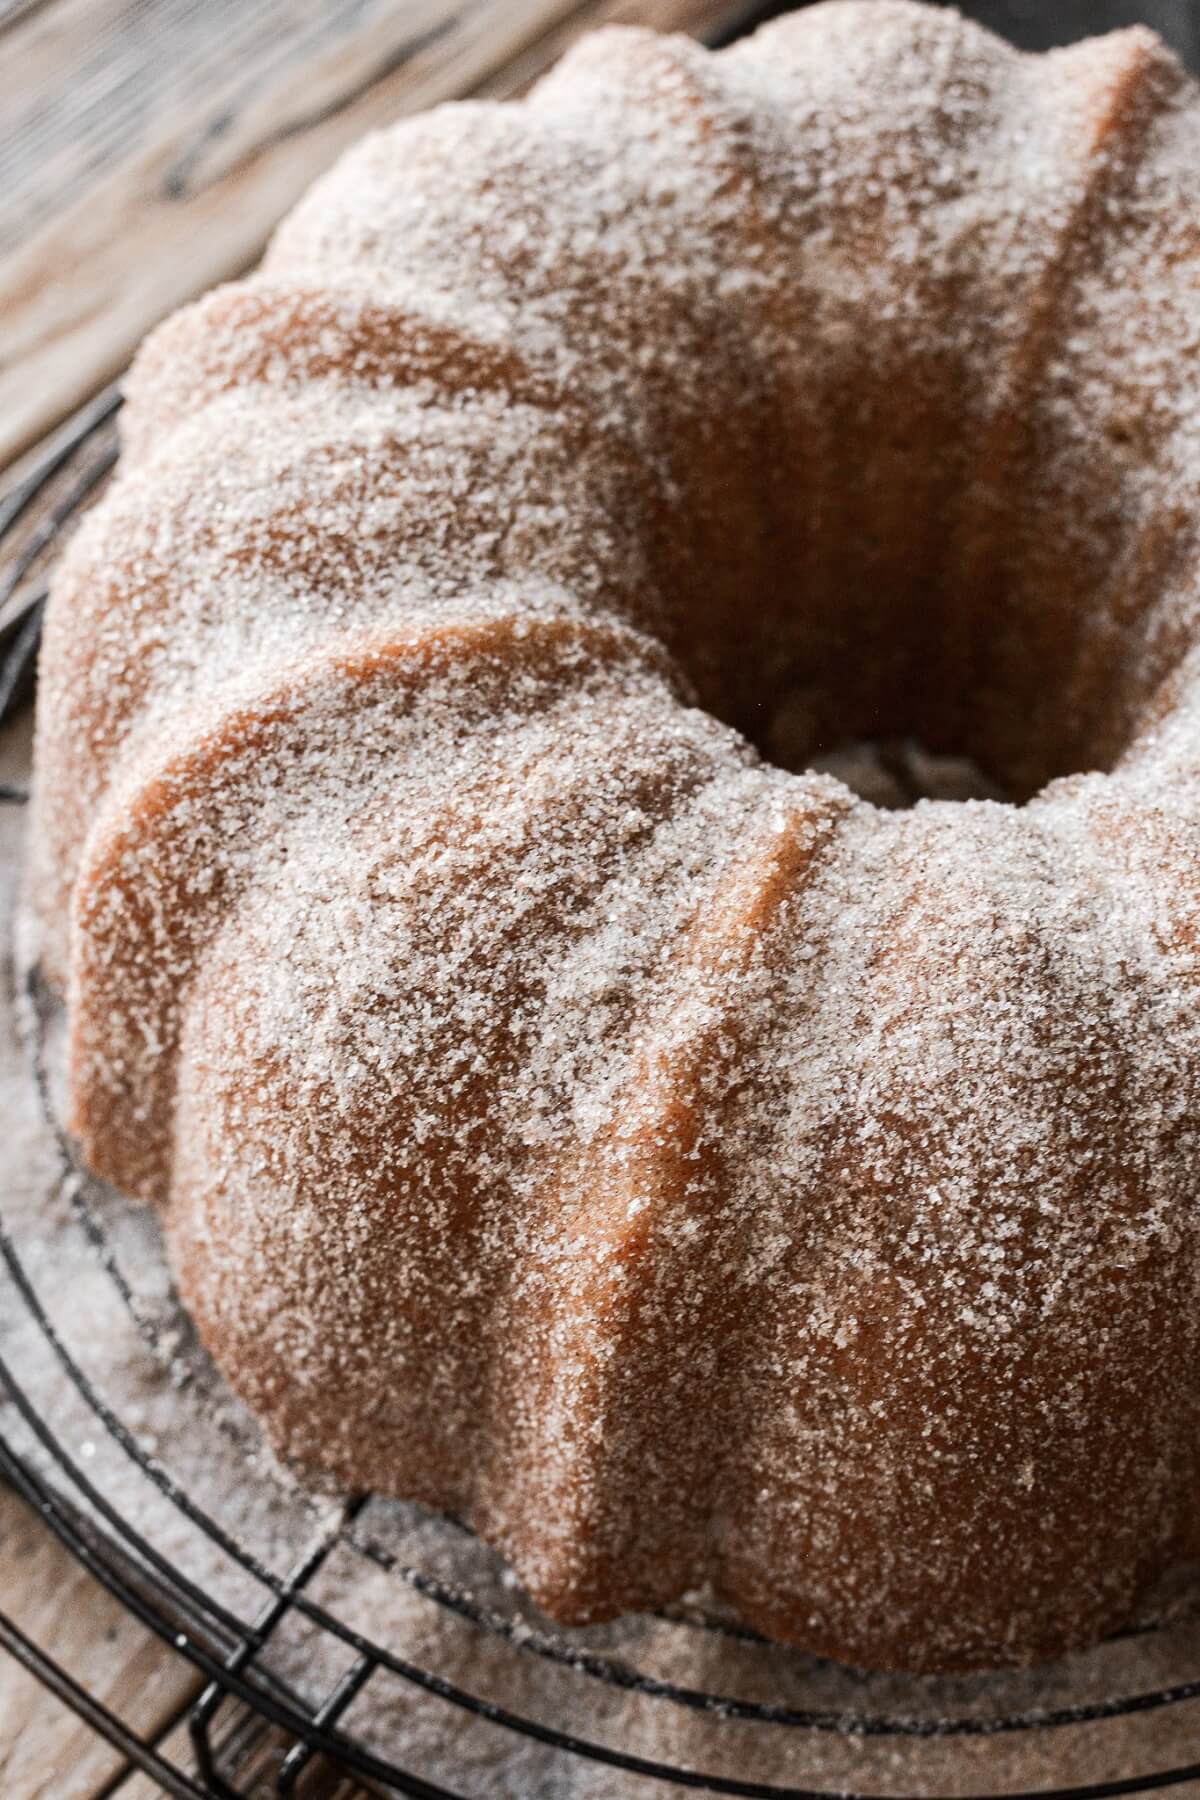 Snickerdoodle bundt cake with cinnamon sugar on a cooling rack.